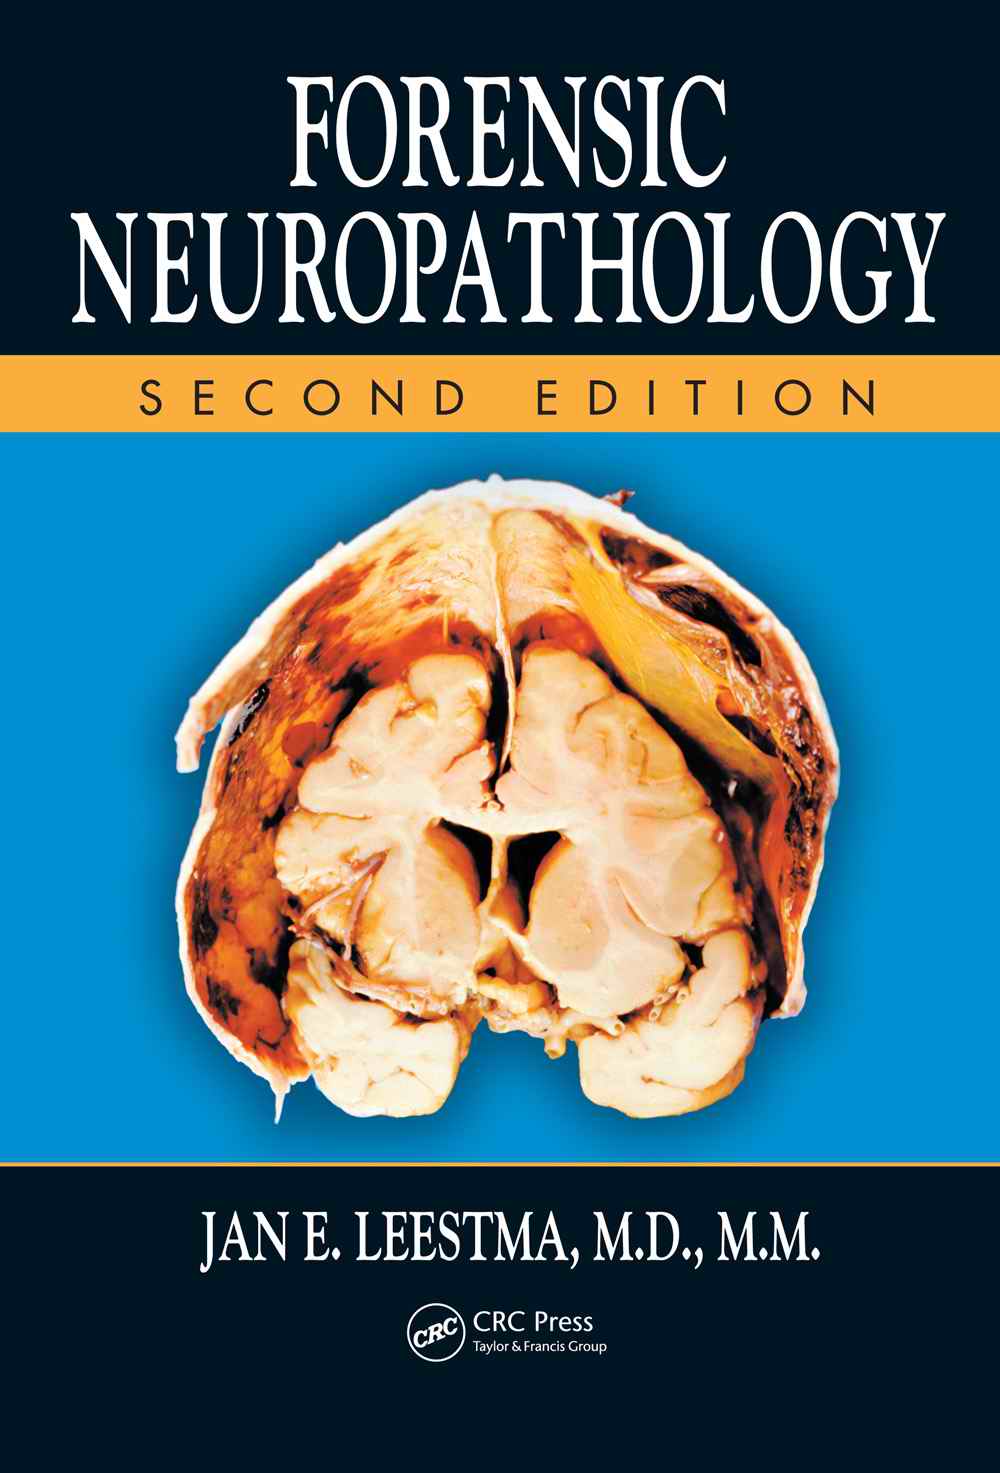 Forensic Neuropathology, Second Edition by Jan E. Leestma